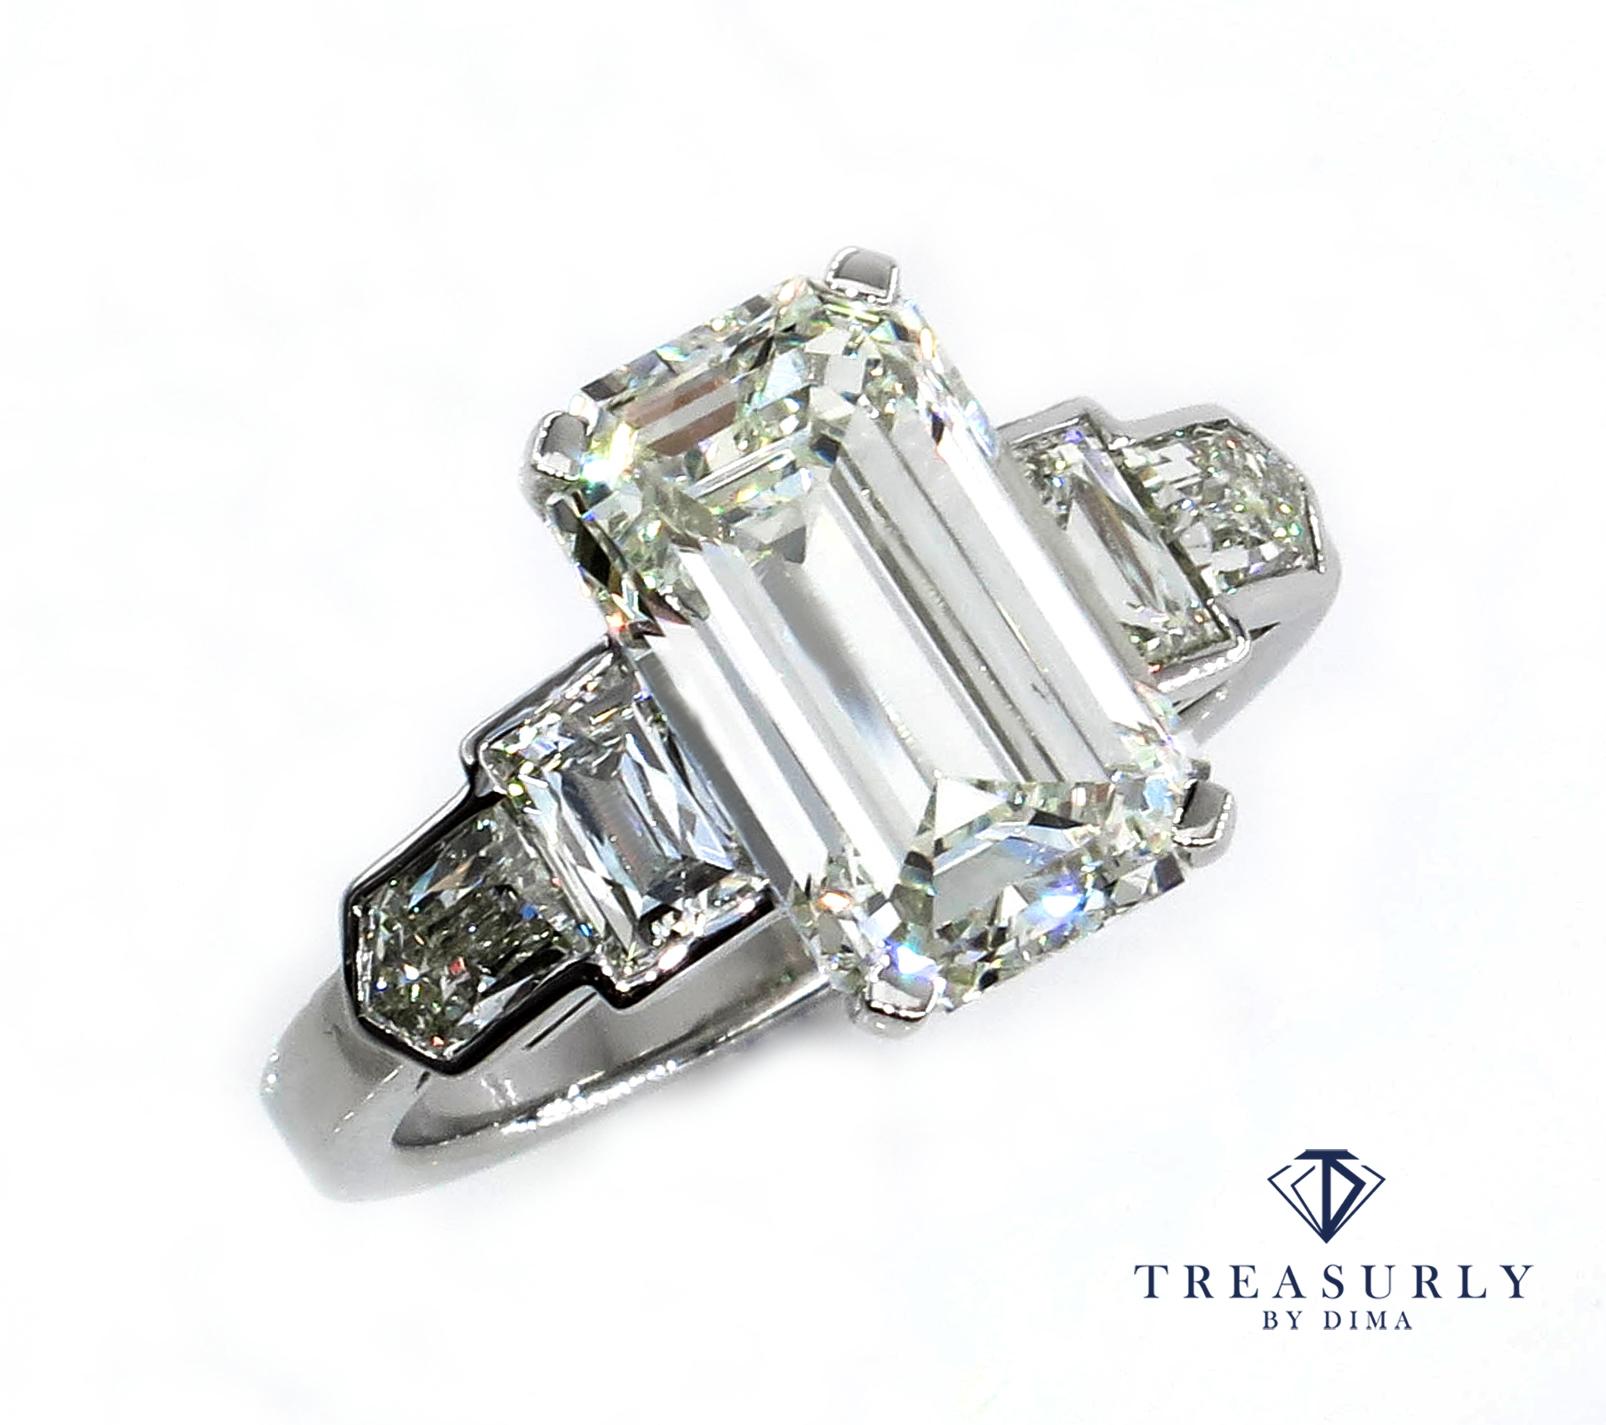 This is ring is just breathtaking. Once in a life time opportunity to own a HUGE 100% NATURAL NONE-treated, great quality diamond for a fraction of the price! The total Diamond Weight is Near 5.0 carat (4.89ctw).

There is nothing more ELEGANT than